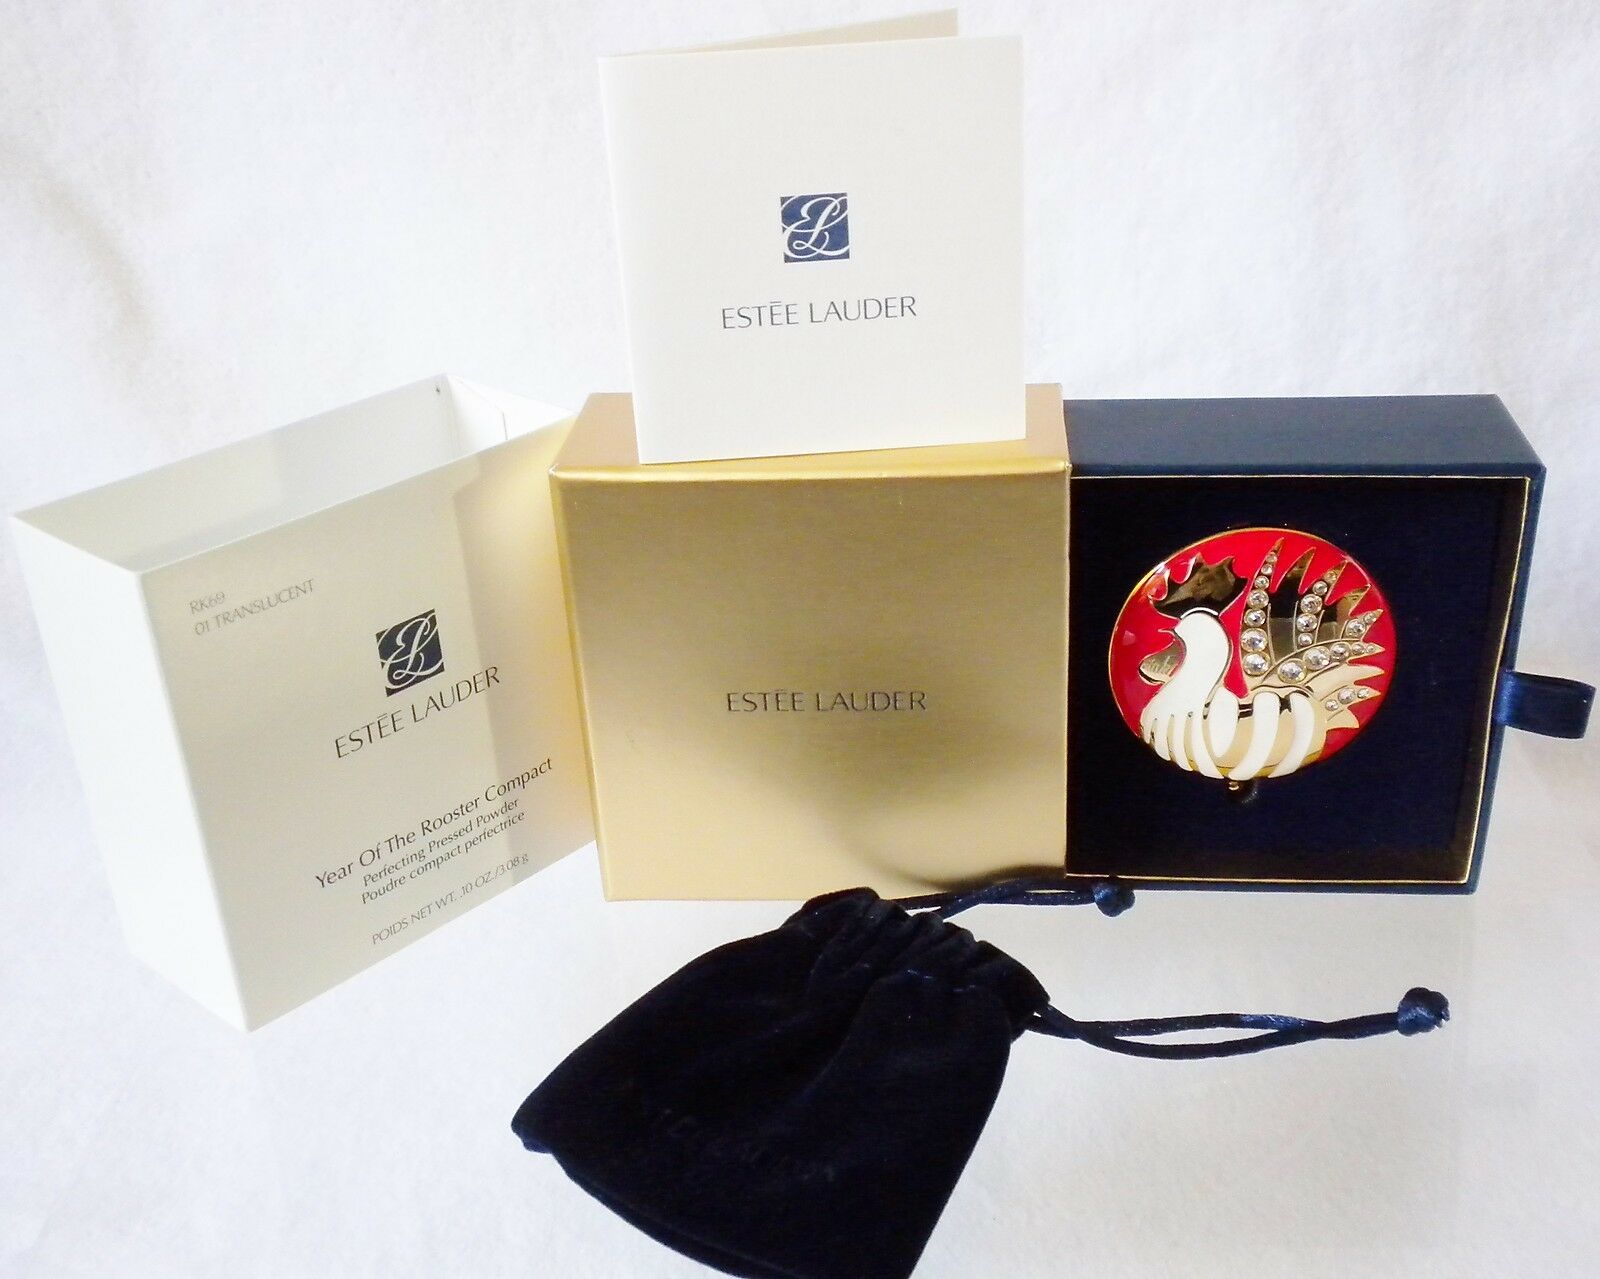 Primary image for Estee Lauder YEAR OF THE ROOSTER Compact - New in Box